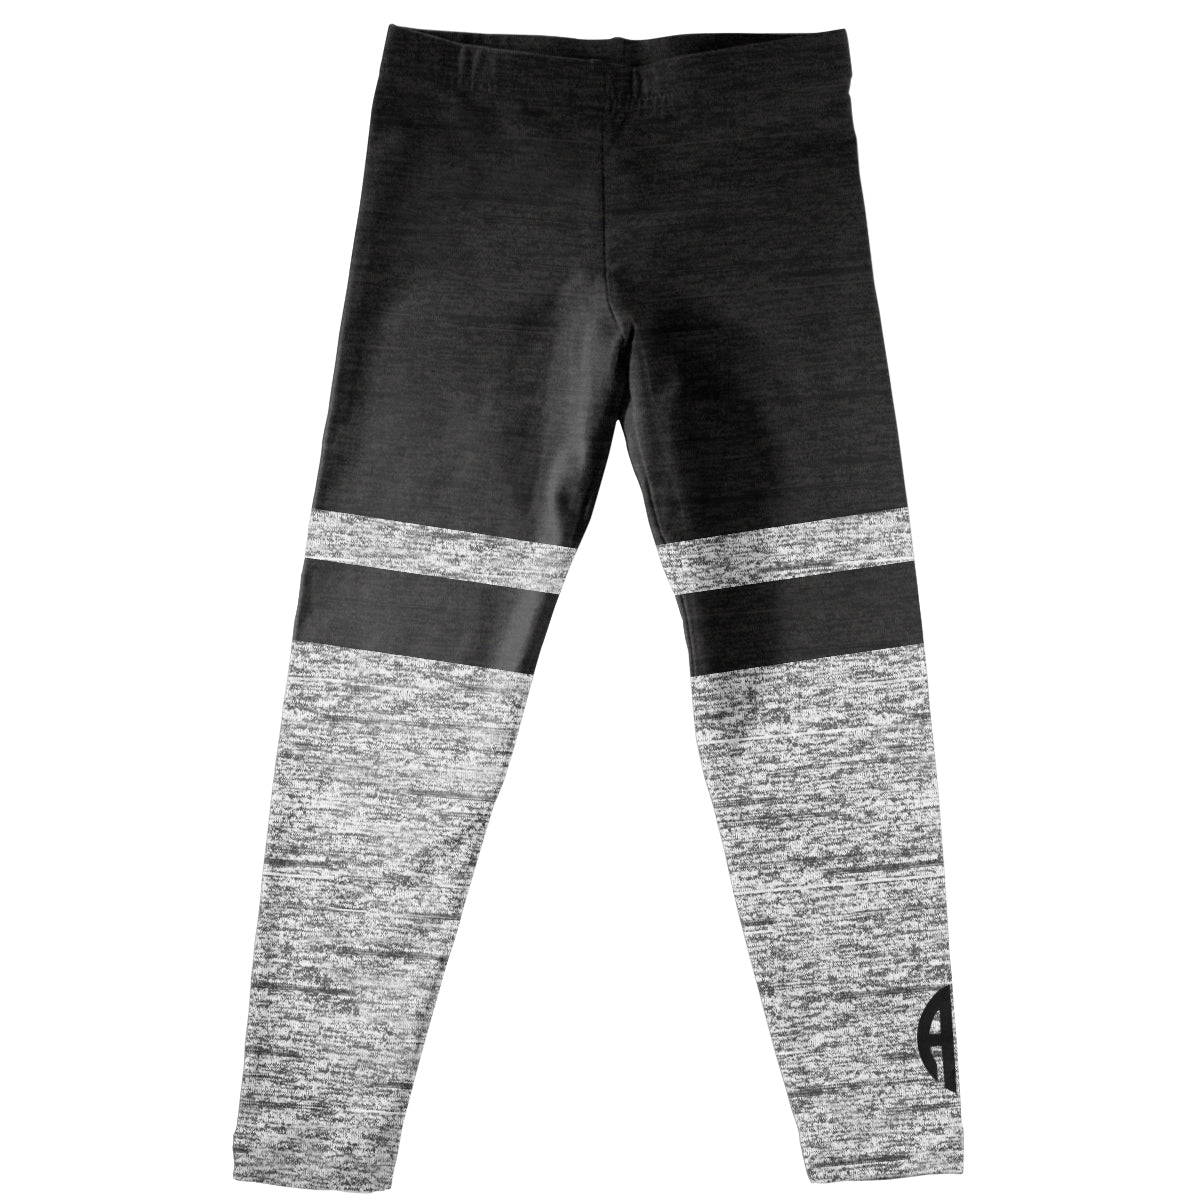 Black and gray heather girls leggings with monogram - Wimziy&Co.